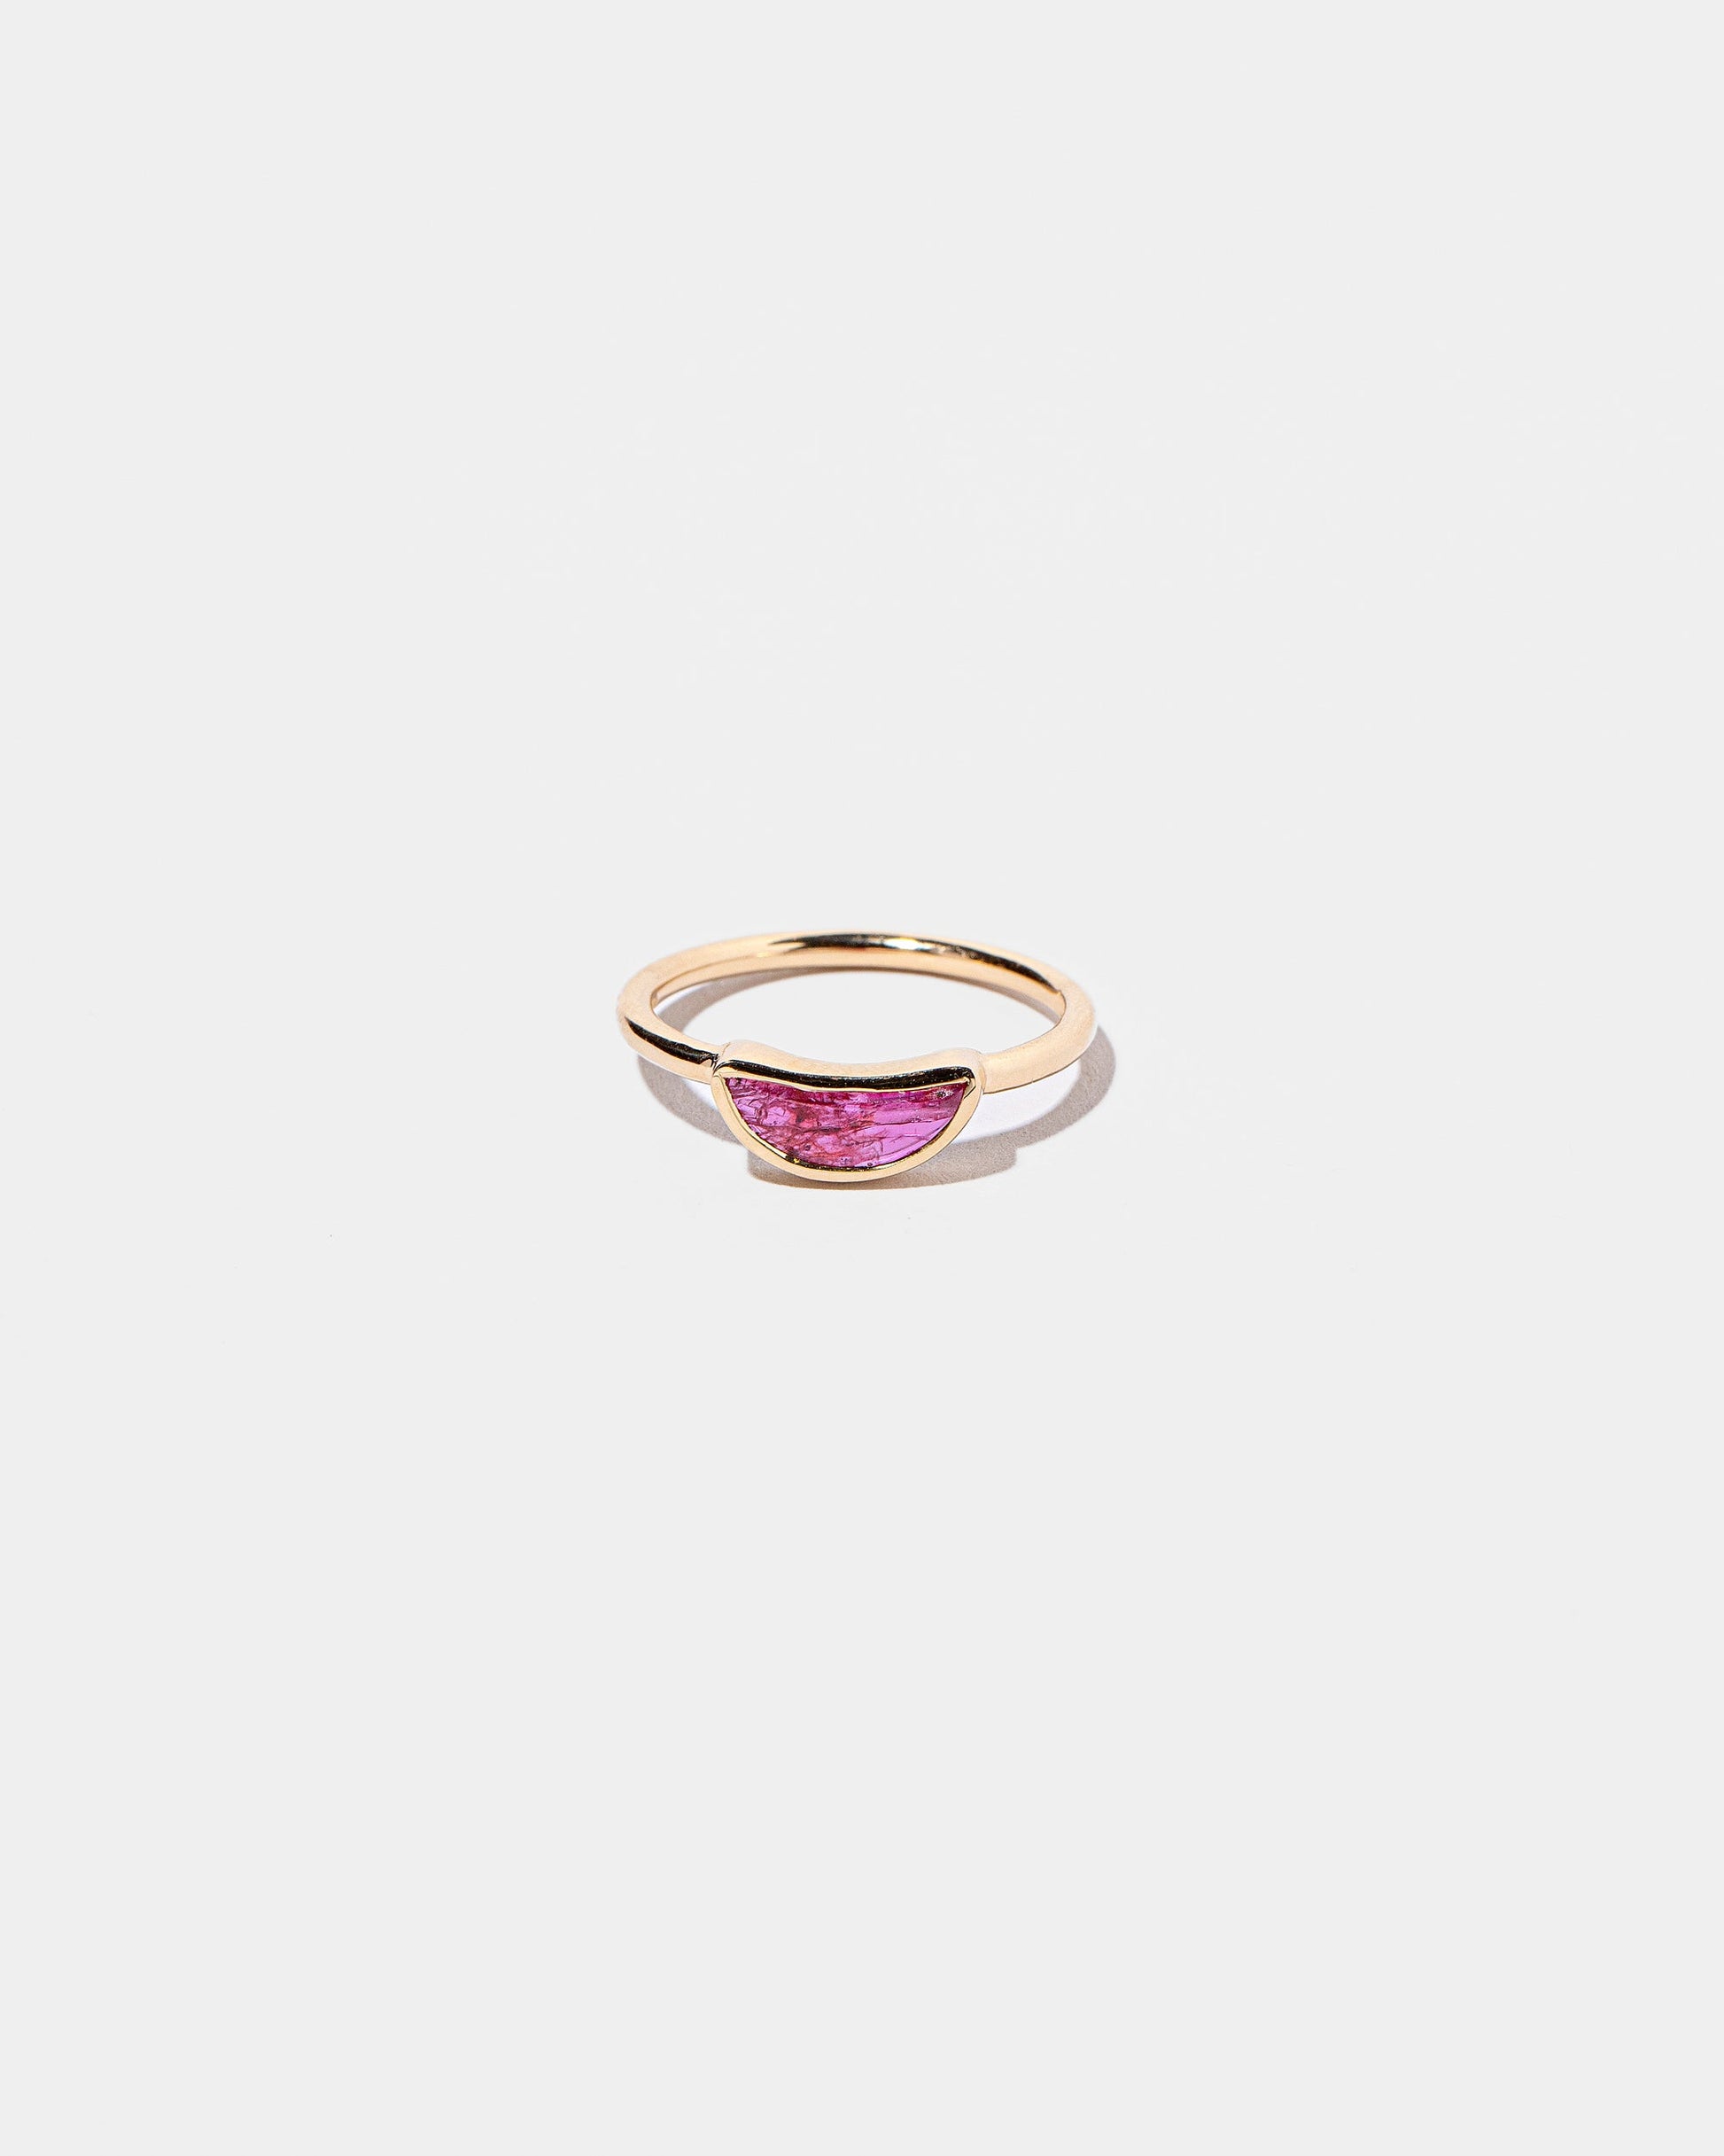  Passion Ring on light color background.